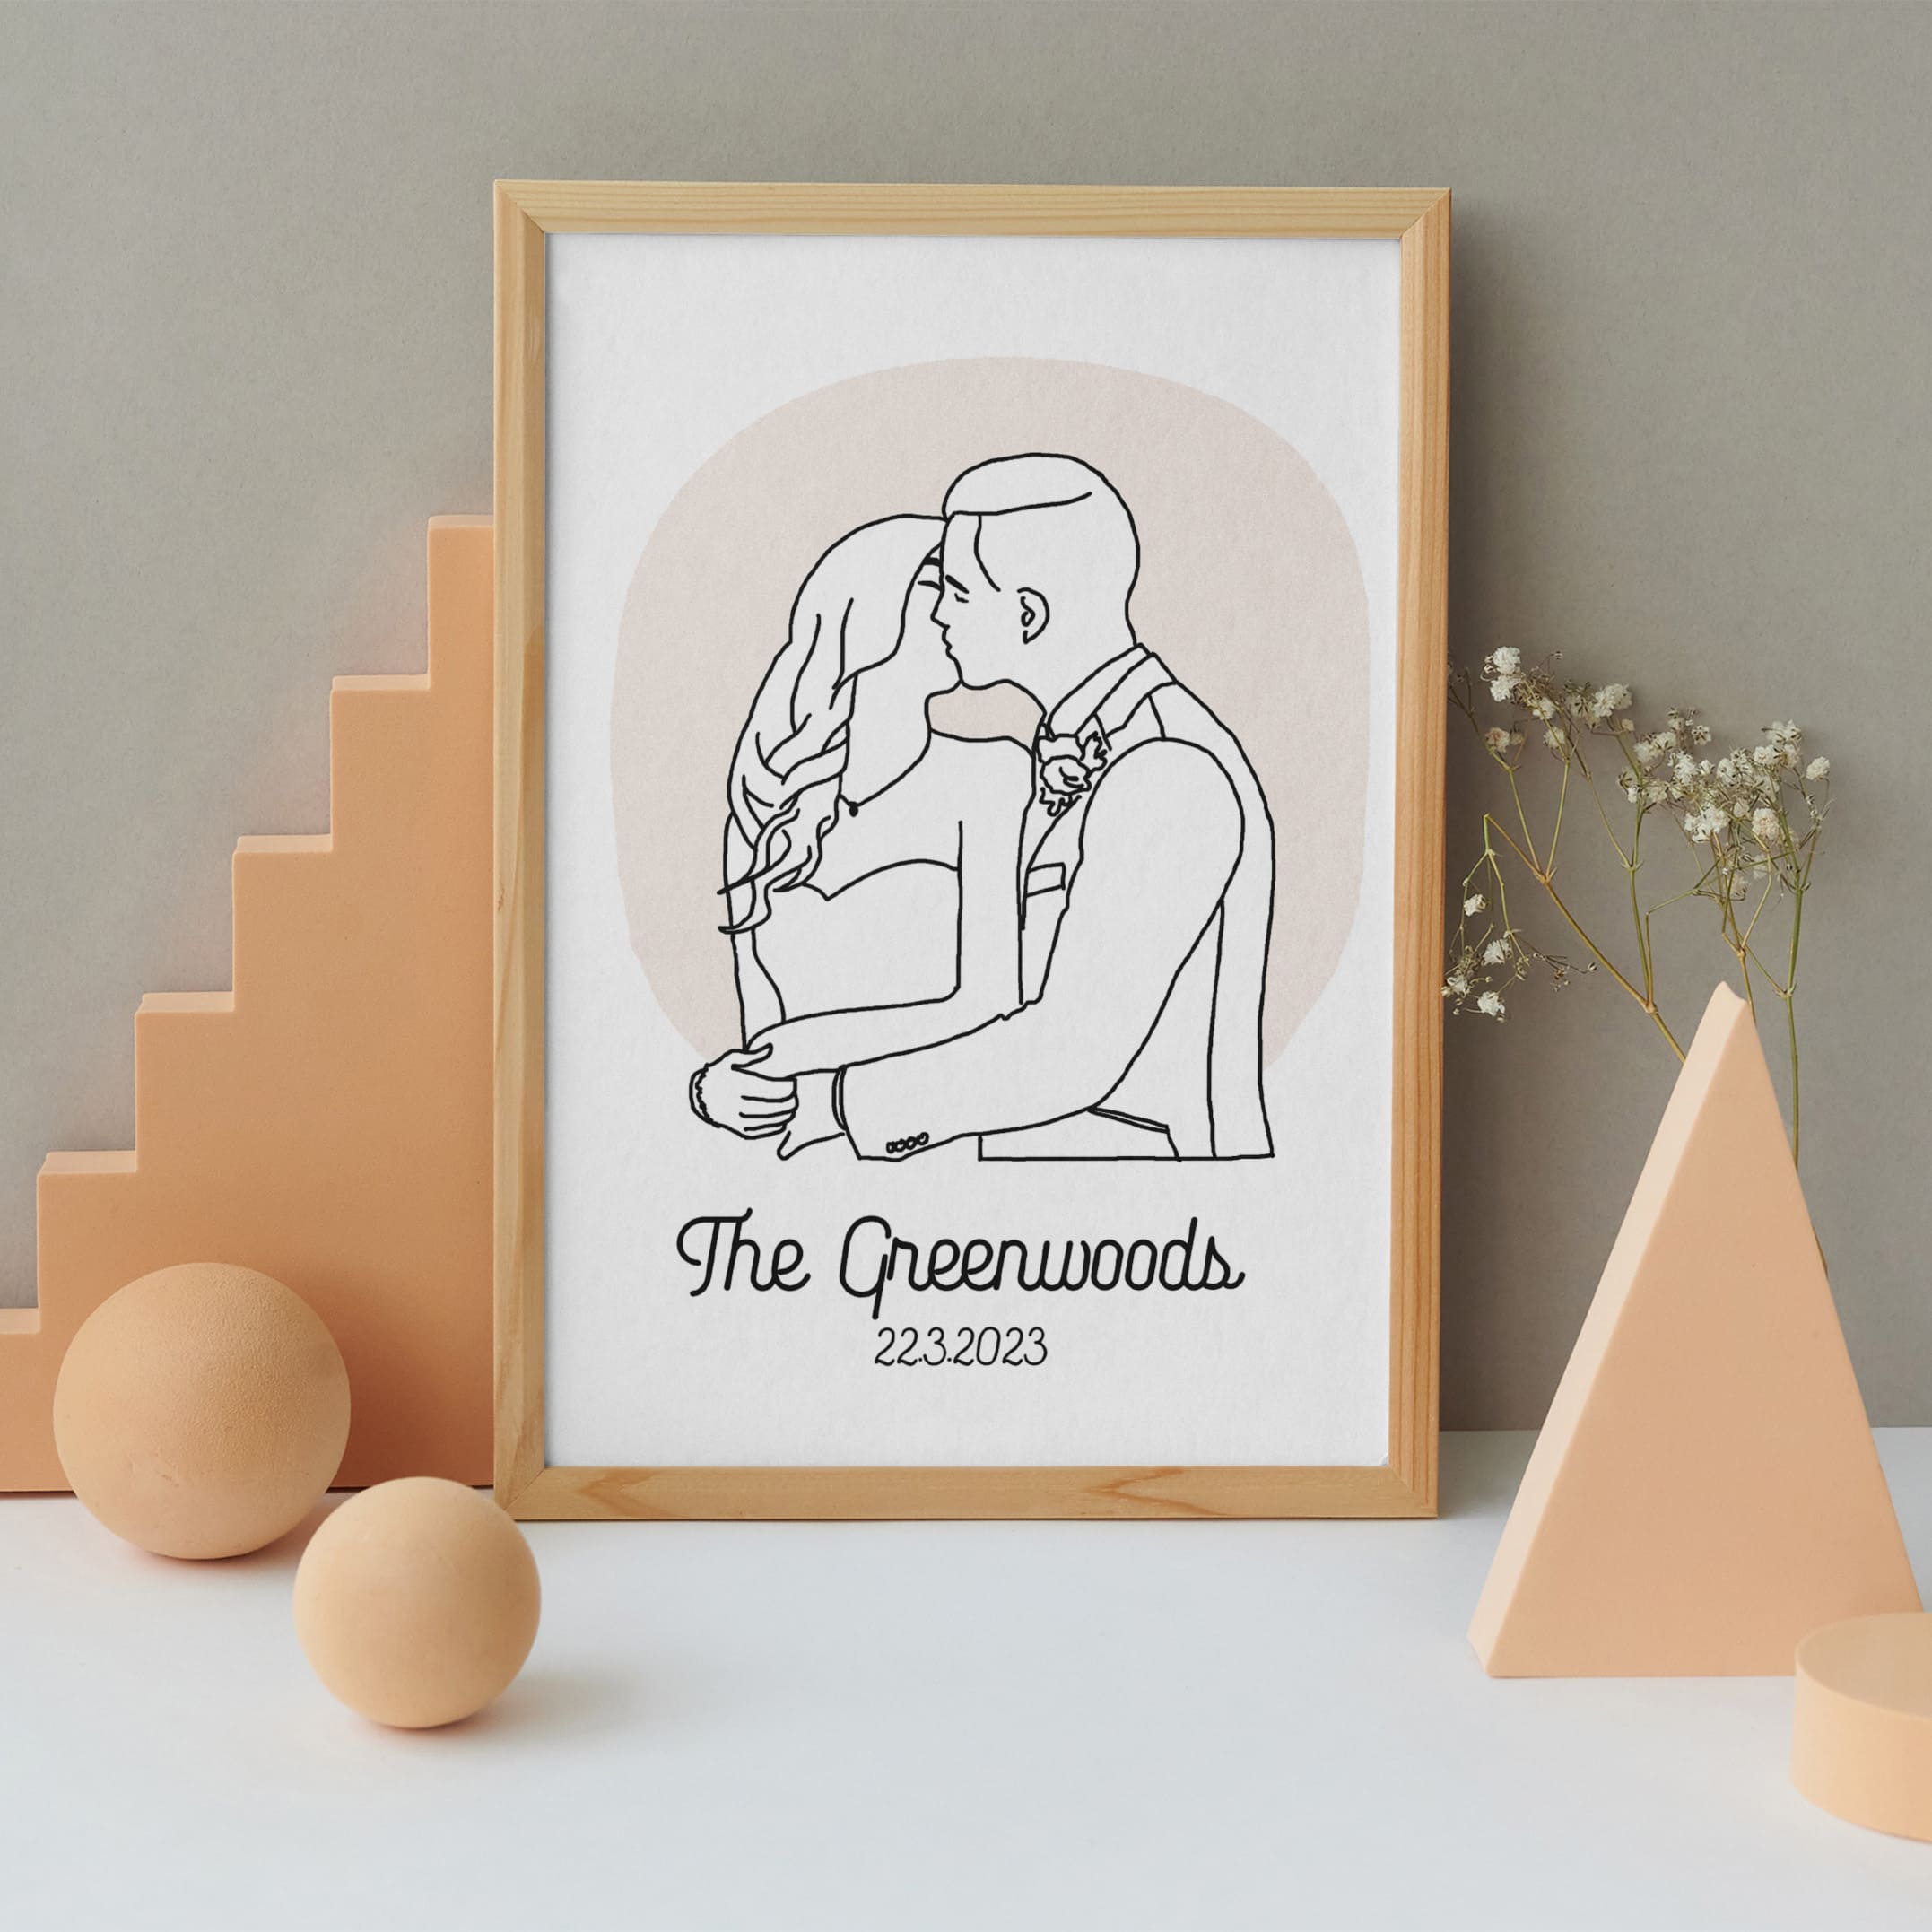 kissing wedding couple portrait from photo in minimalist line art style with their names and date hand illustrated